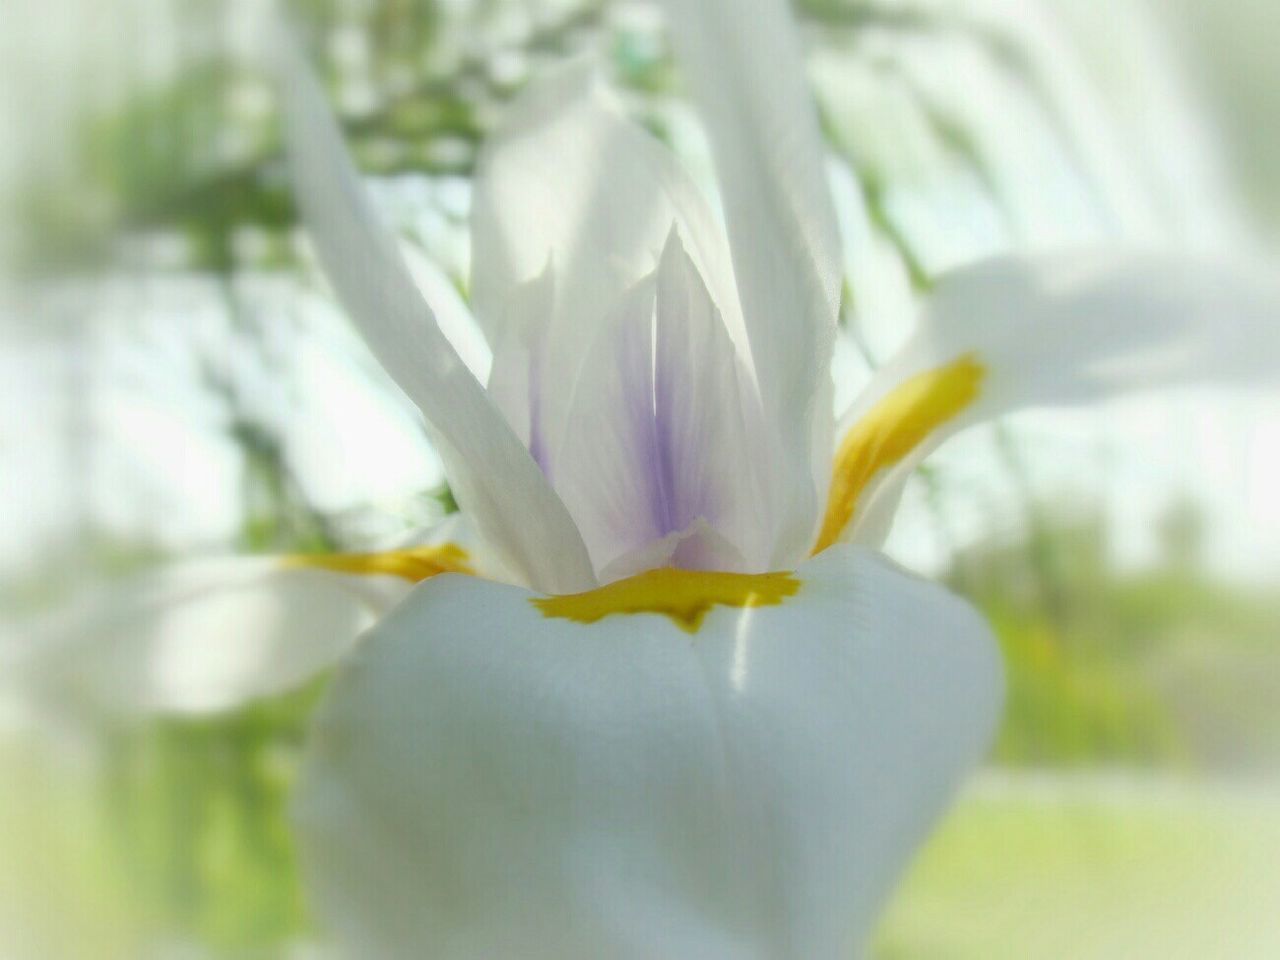 CLOSE-UP OF FLOWER BLOOMING